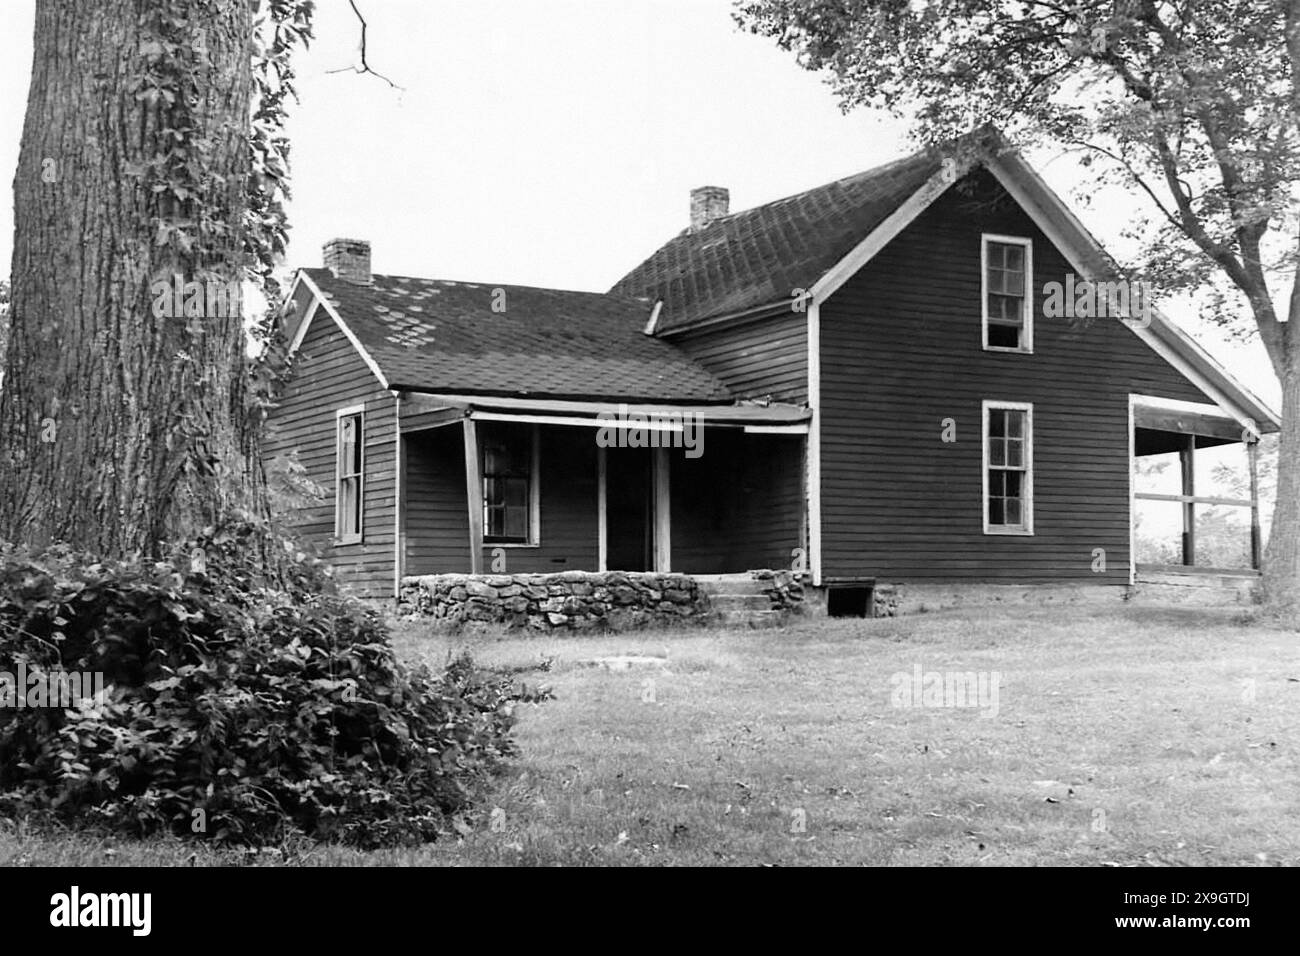 The 1881 Moses Carver House in Diamond, Missouri, at the George Washington Carver National Monument. The home was constructed after a tornado demolished several dwellings on the farm, including the birth site cabin of George Washington Carver. (USA) Stock Photo